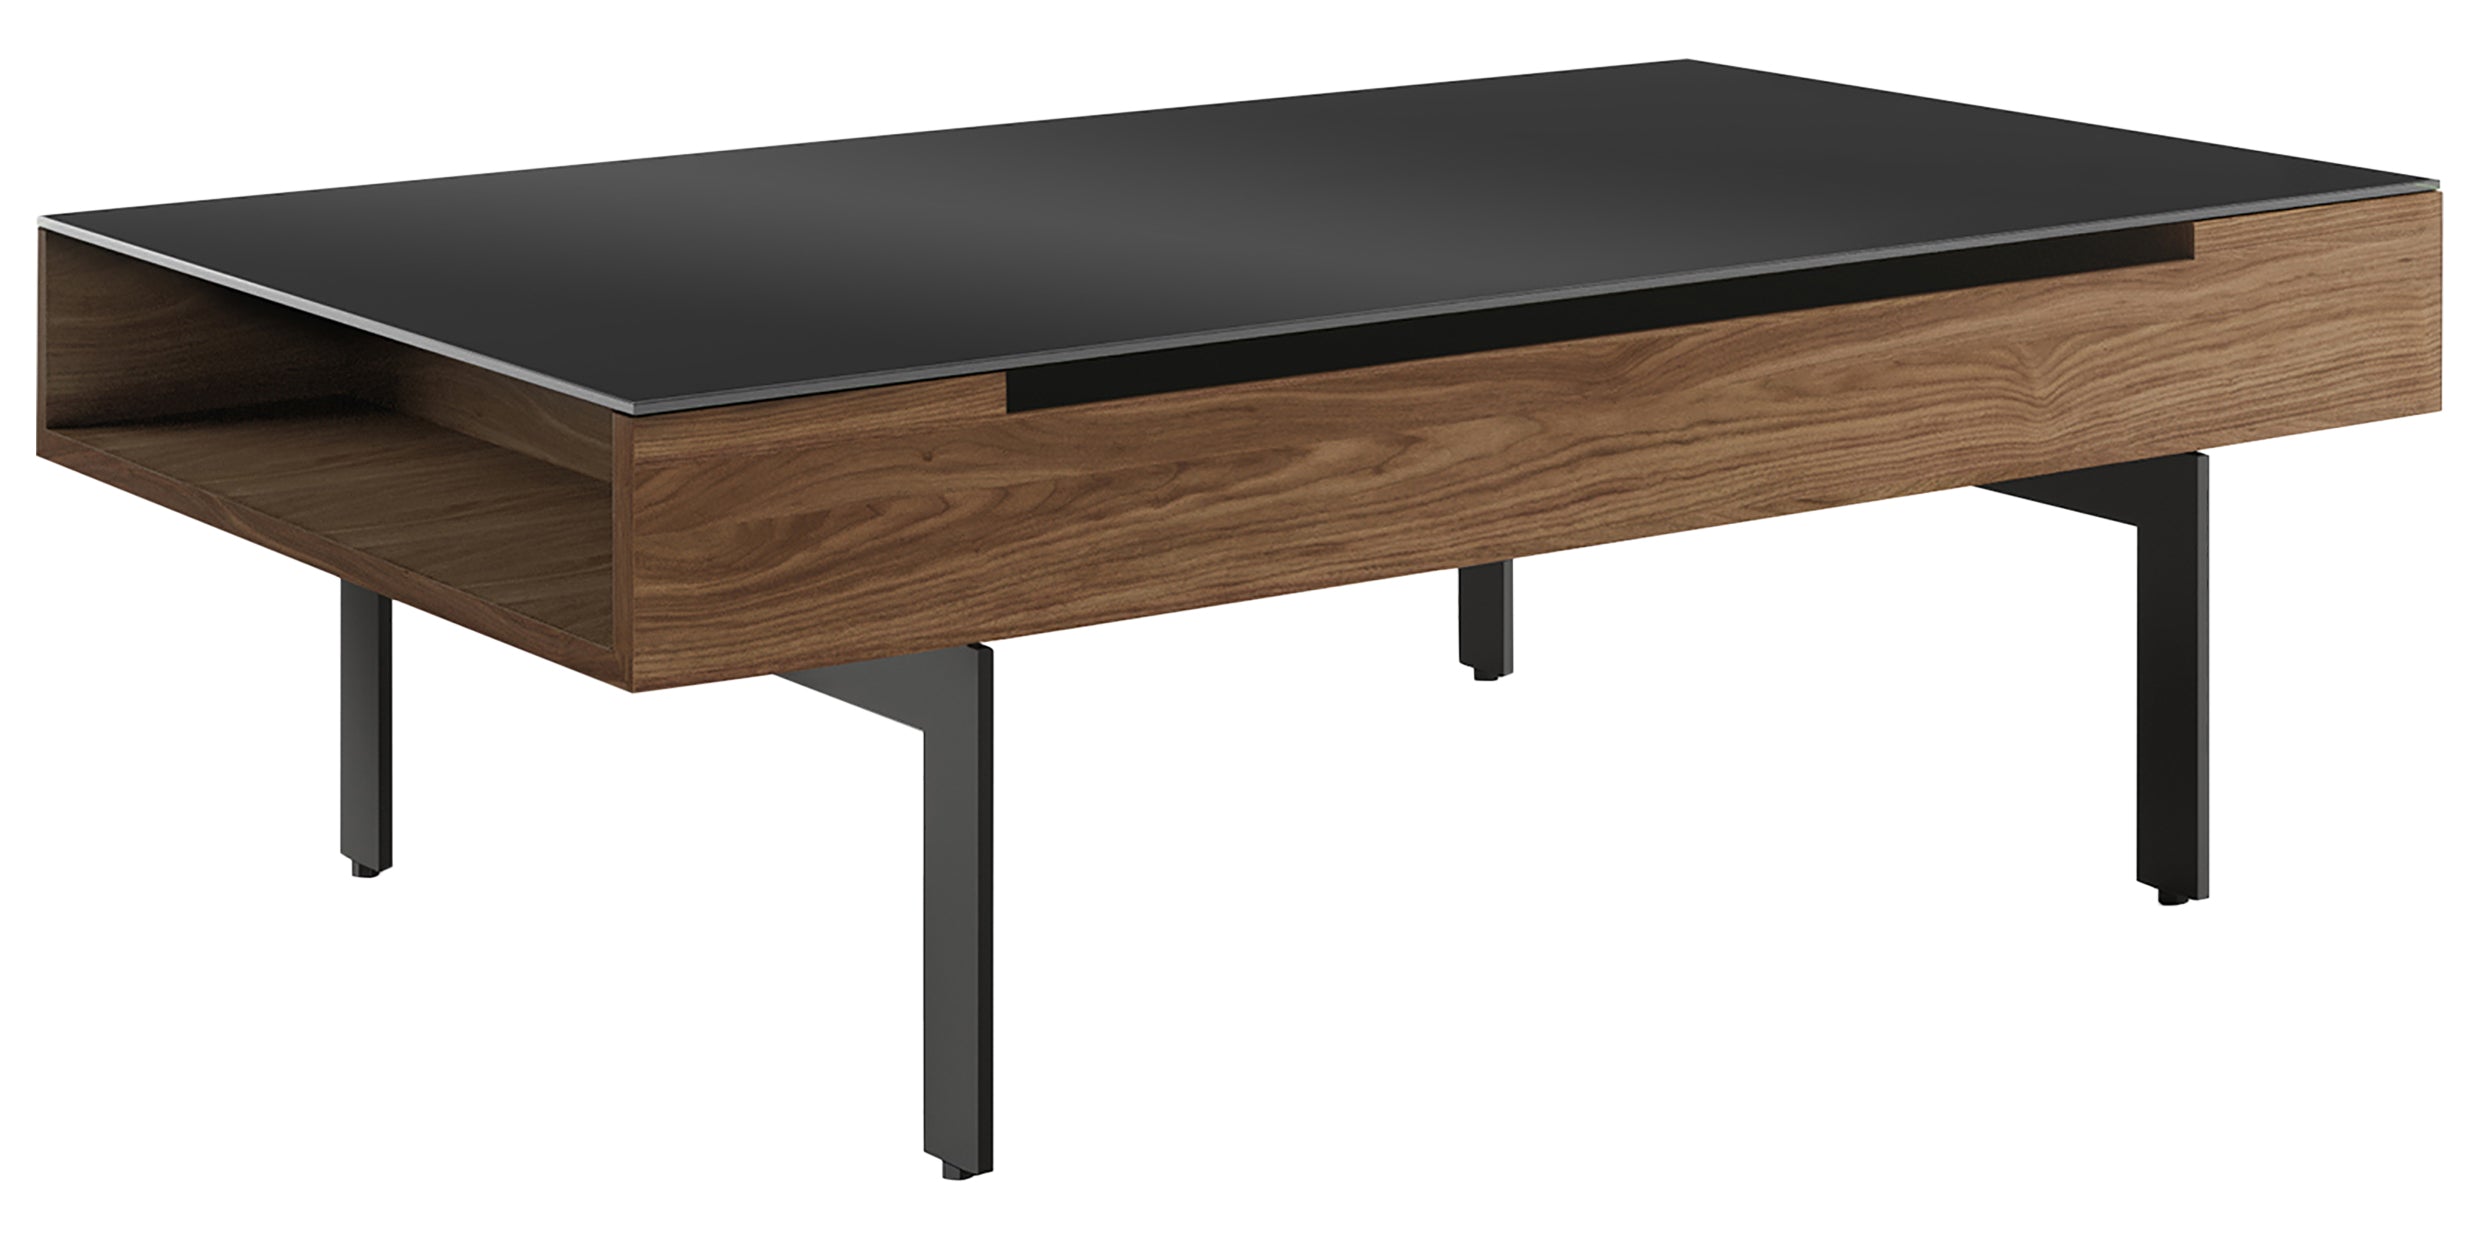 Natural Walnut Veneer & Black Satin-Etched Glass with Black Steel | BDI Reveal Lift Coffee Table | Valley Ridge Furniture